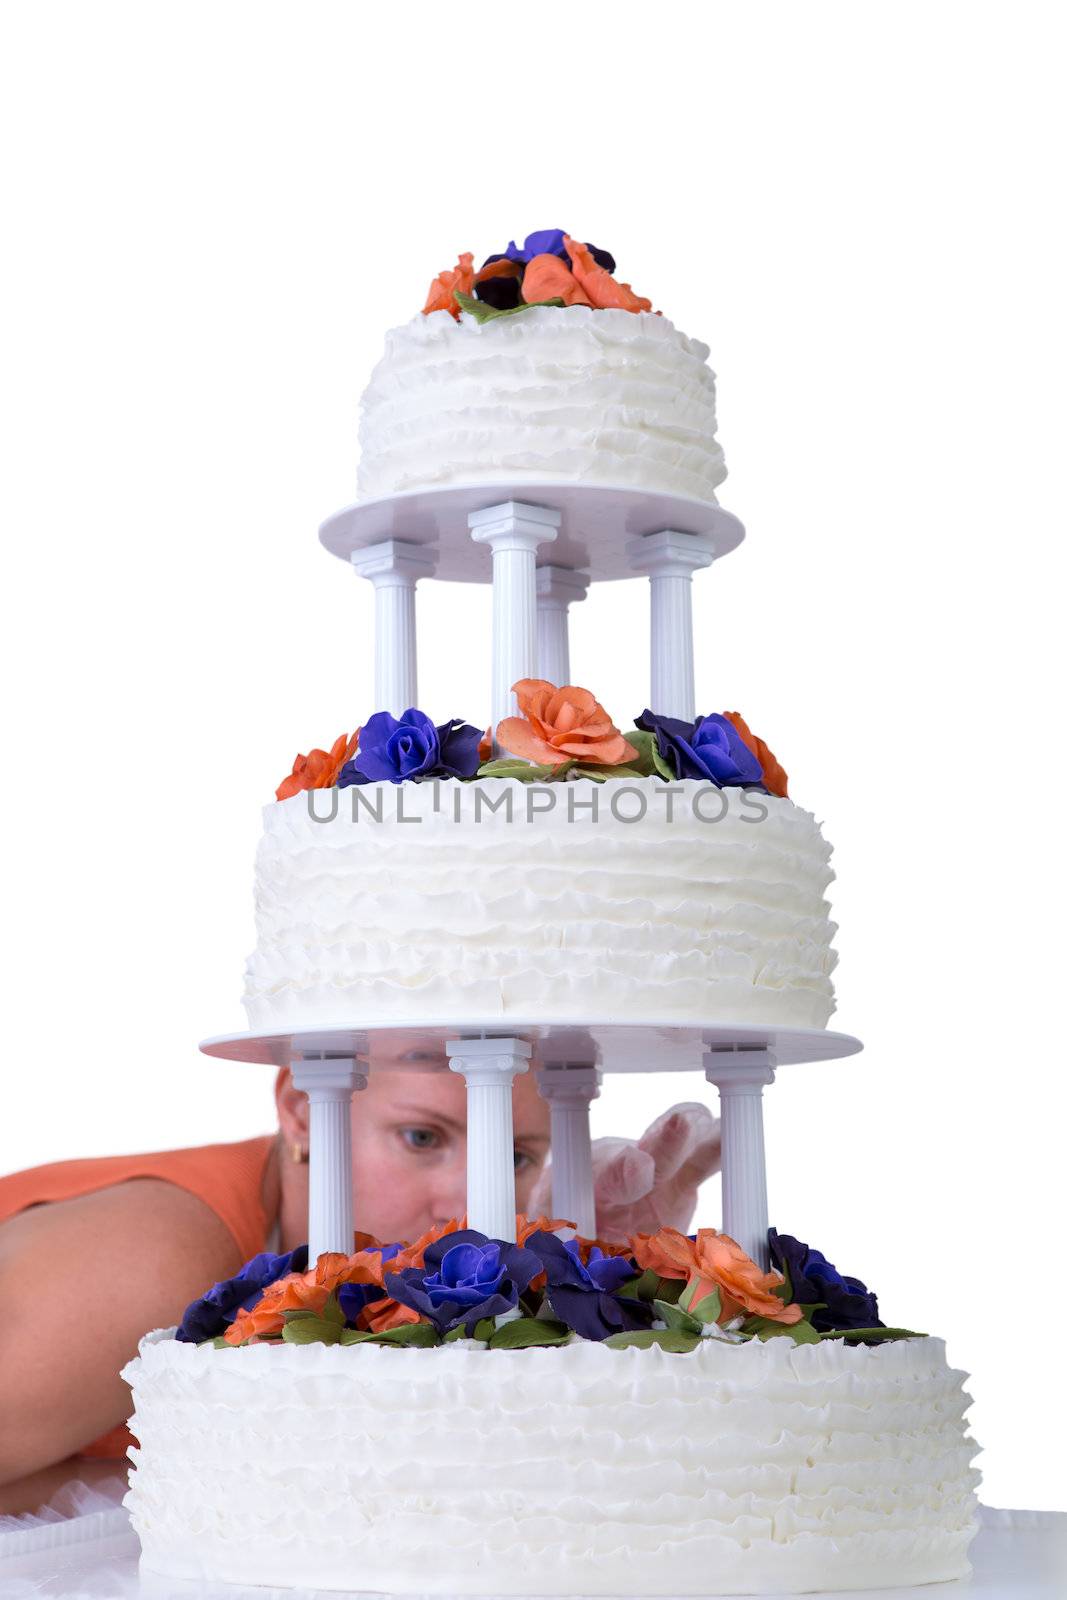 Baker lady giving to a wedding cake latest small retouches, cake has fondant ruffles on the side and decorated with orange and purple gum paste roses